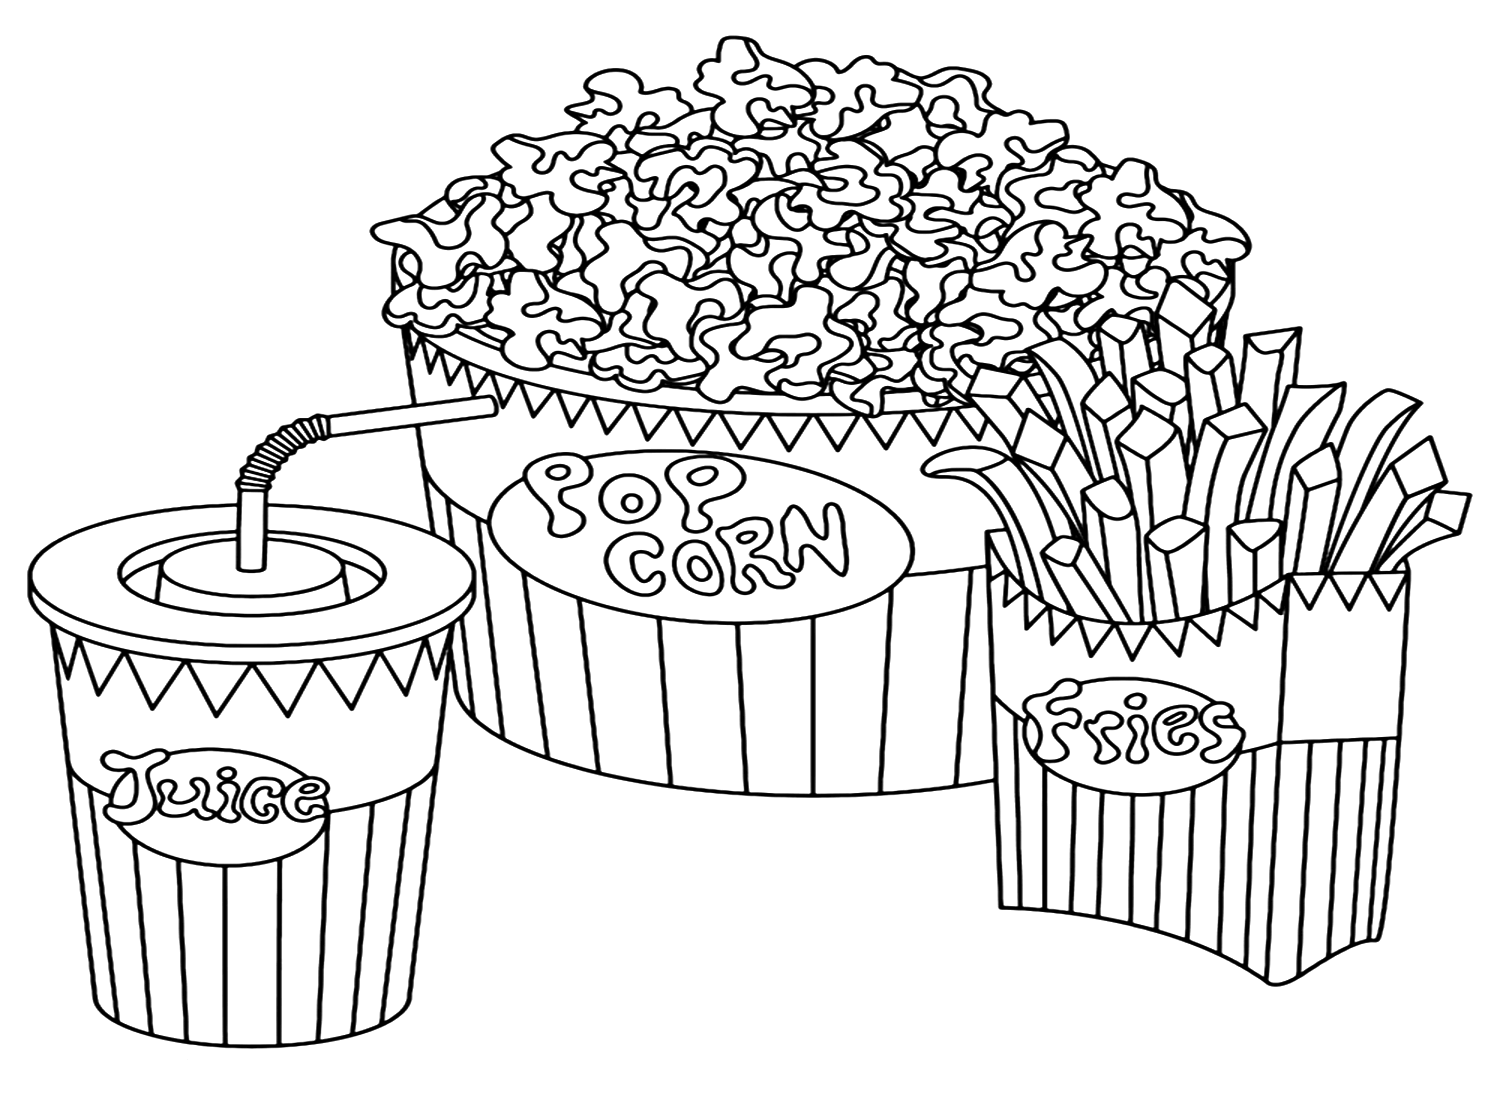 Popcorn Coloring Page For Kids from Popcorn